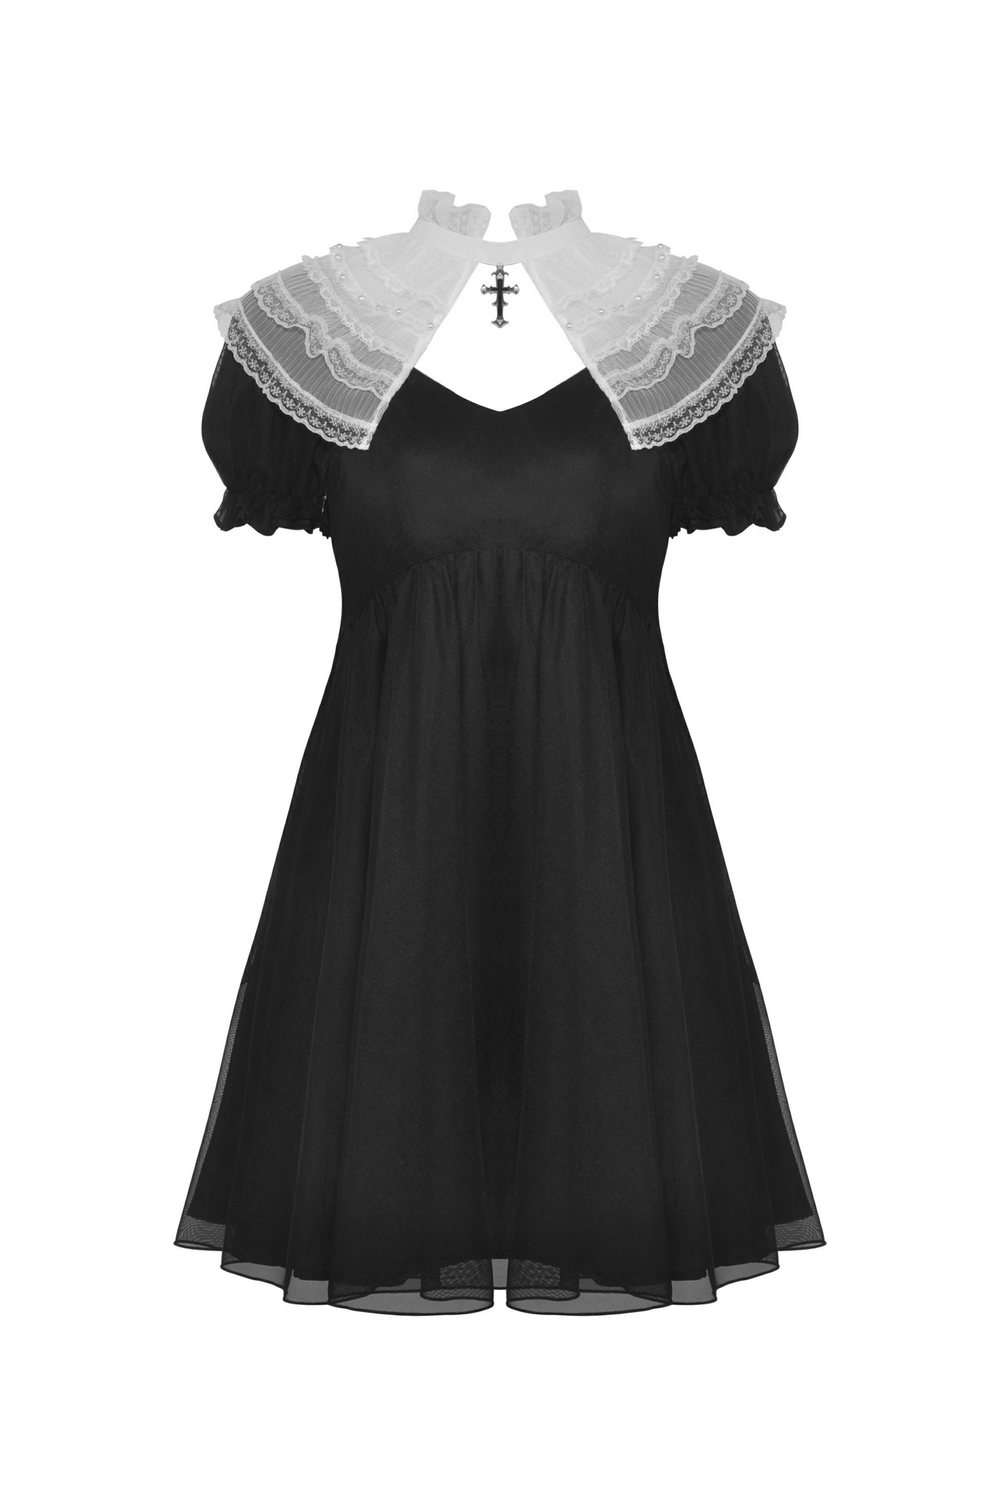 Elegant Black Dress with Removable Lace Collar and Short Sleeves